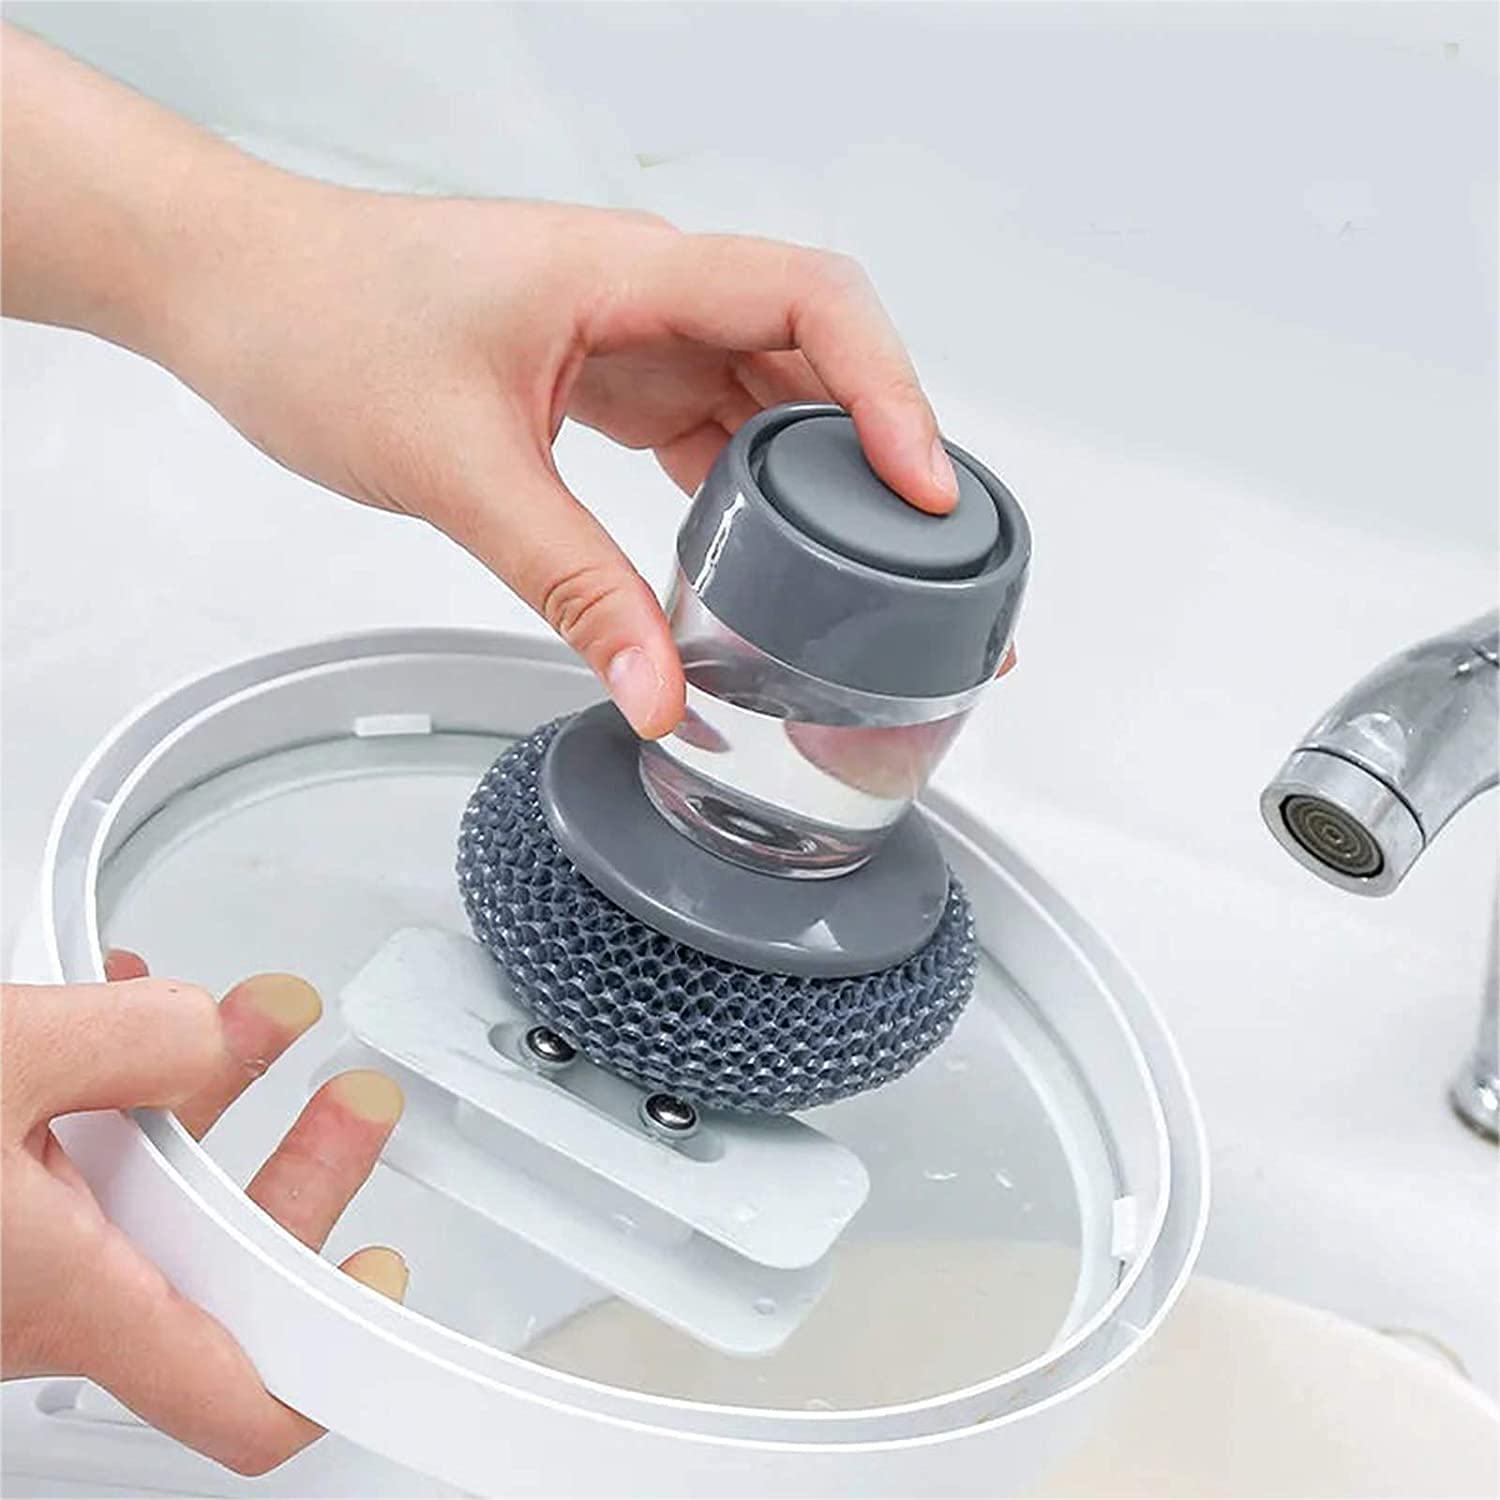 https://homeycomplex.com/products/kitchen-soap-dispensing-palm-brush?variant=40956863217796